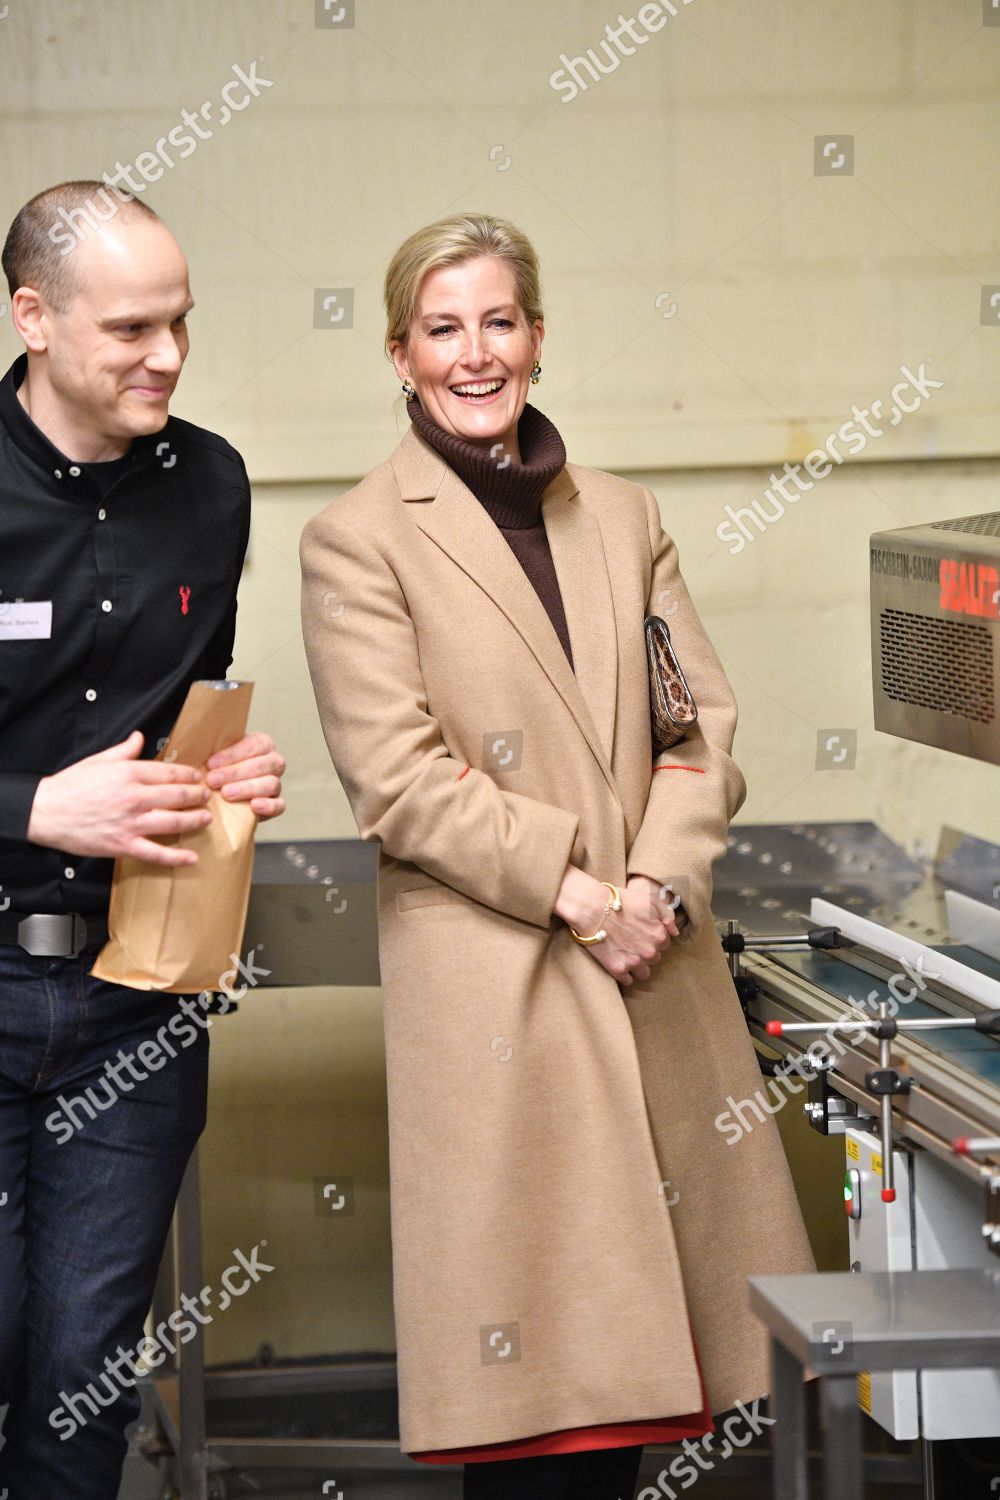 sophie-countess-of-wessex-visit-to-cumbria-shutterstock-editorial-10095439m.jpg